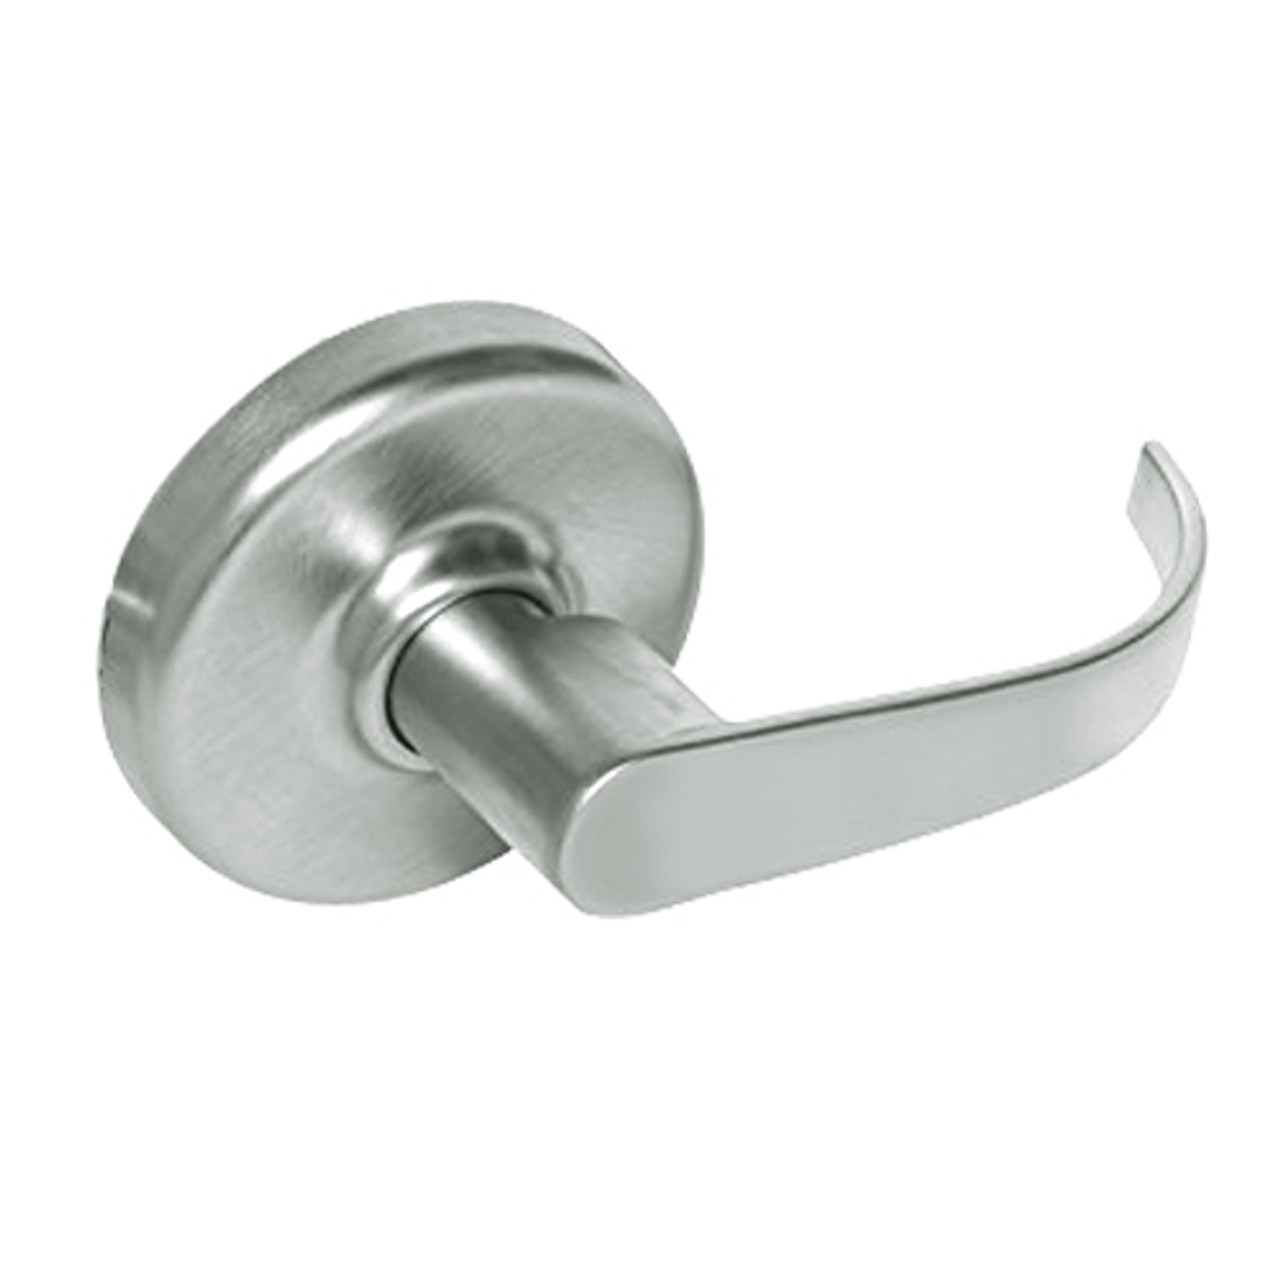 CL3390-PZD-618 Corbin CL3300 Series Extra Heavy Duty Passage with Turnpiece Cylindrical Locksets with Princeton Lever in Bright Nickel Plated Finish